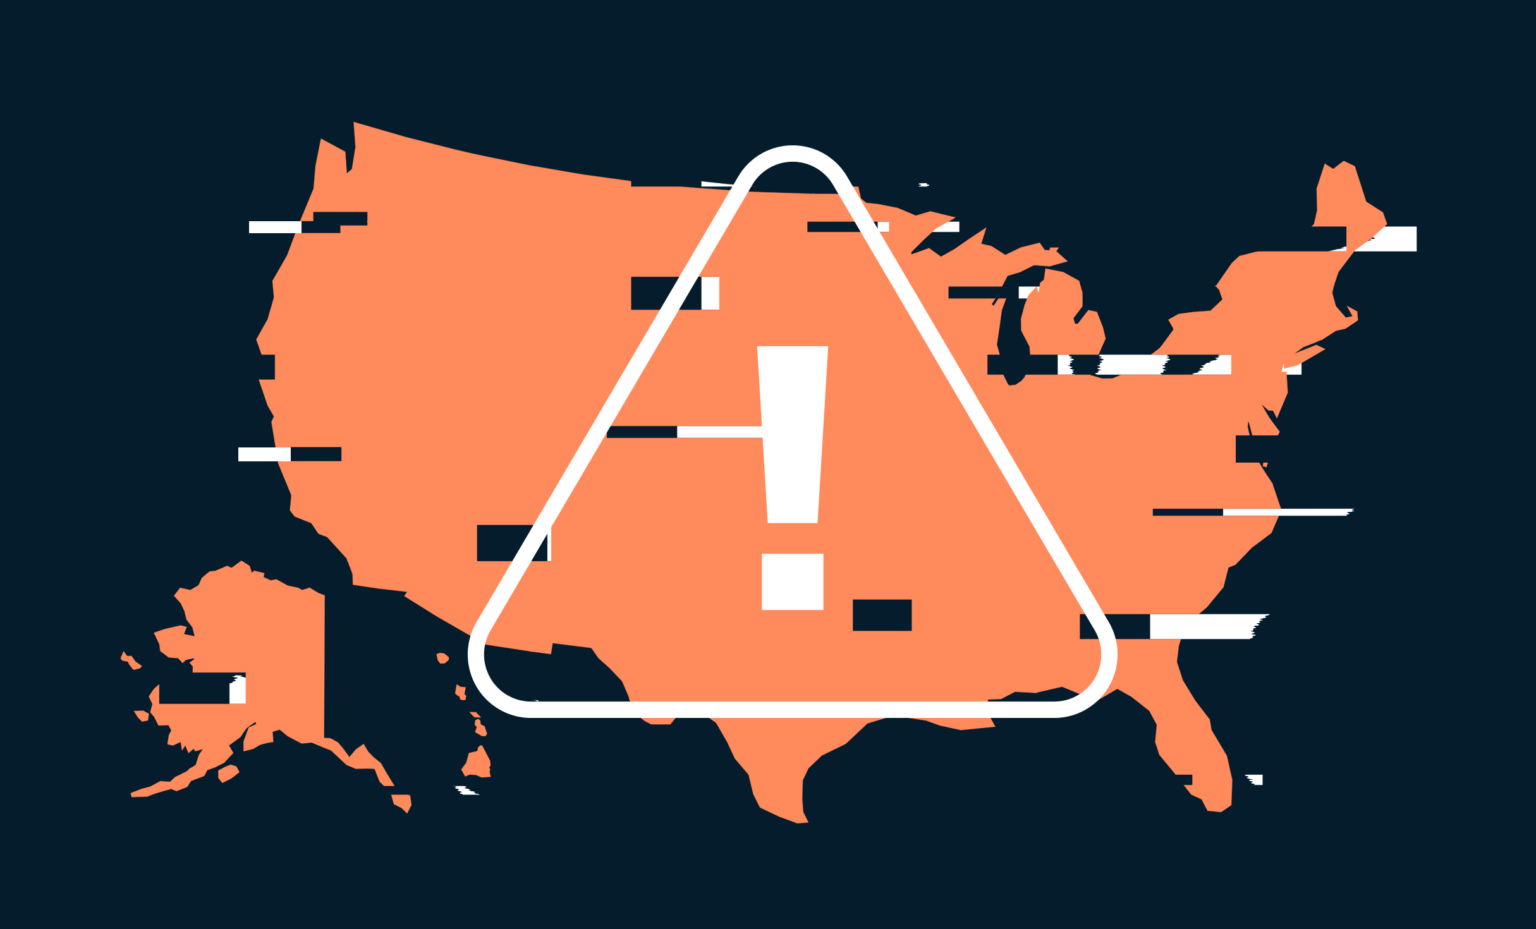 A map of the US with glitch effects. Overlaid on it is an exclamation point within a triangle.